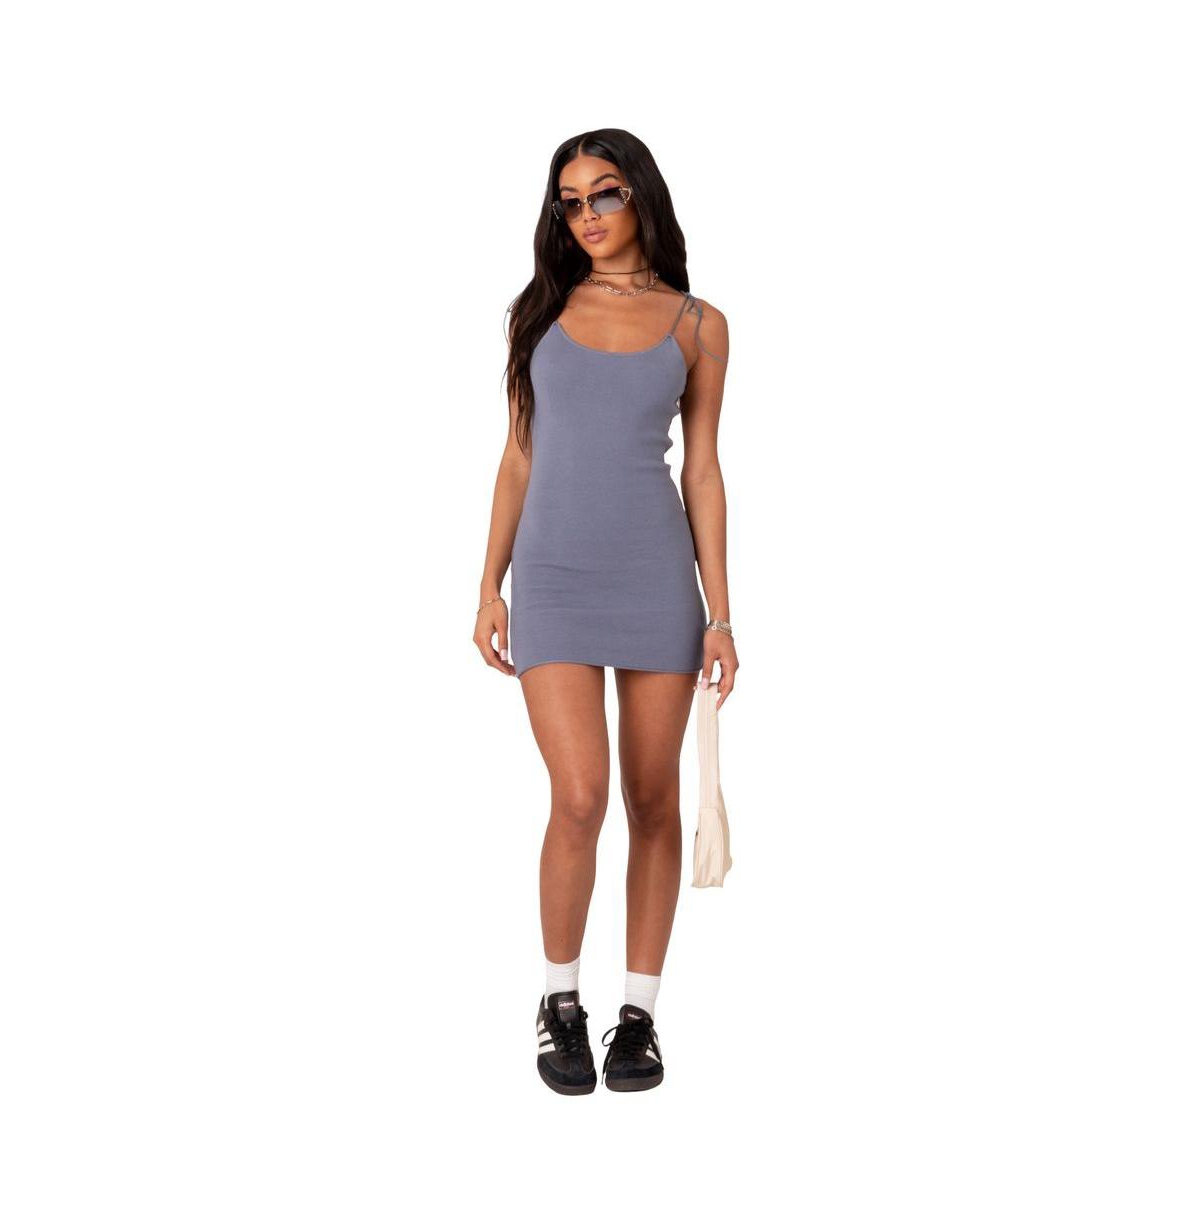 EDIKTED WOMEN'S MINI KNITTED DRESS WITH TIE UP SHOULDER STRAPS